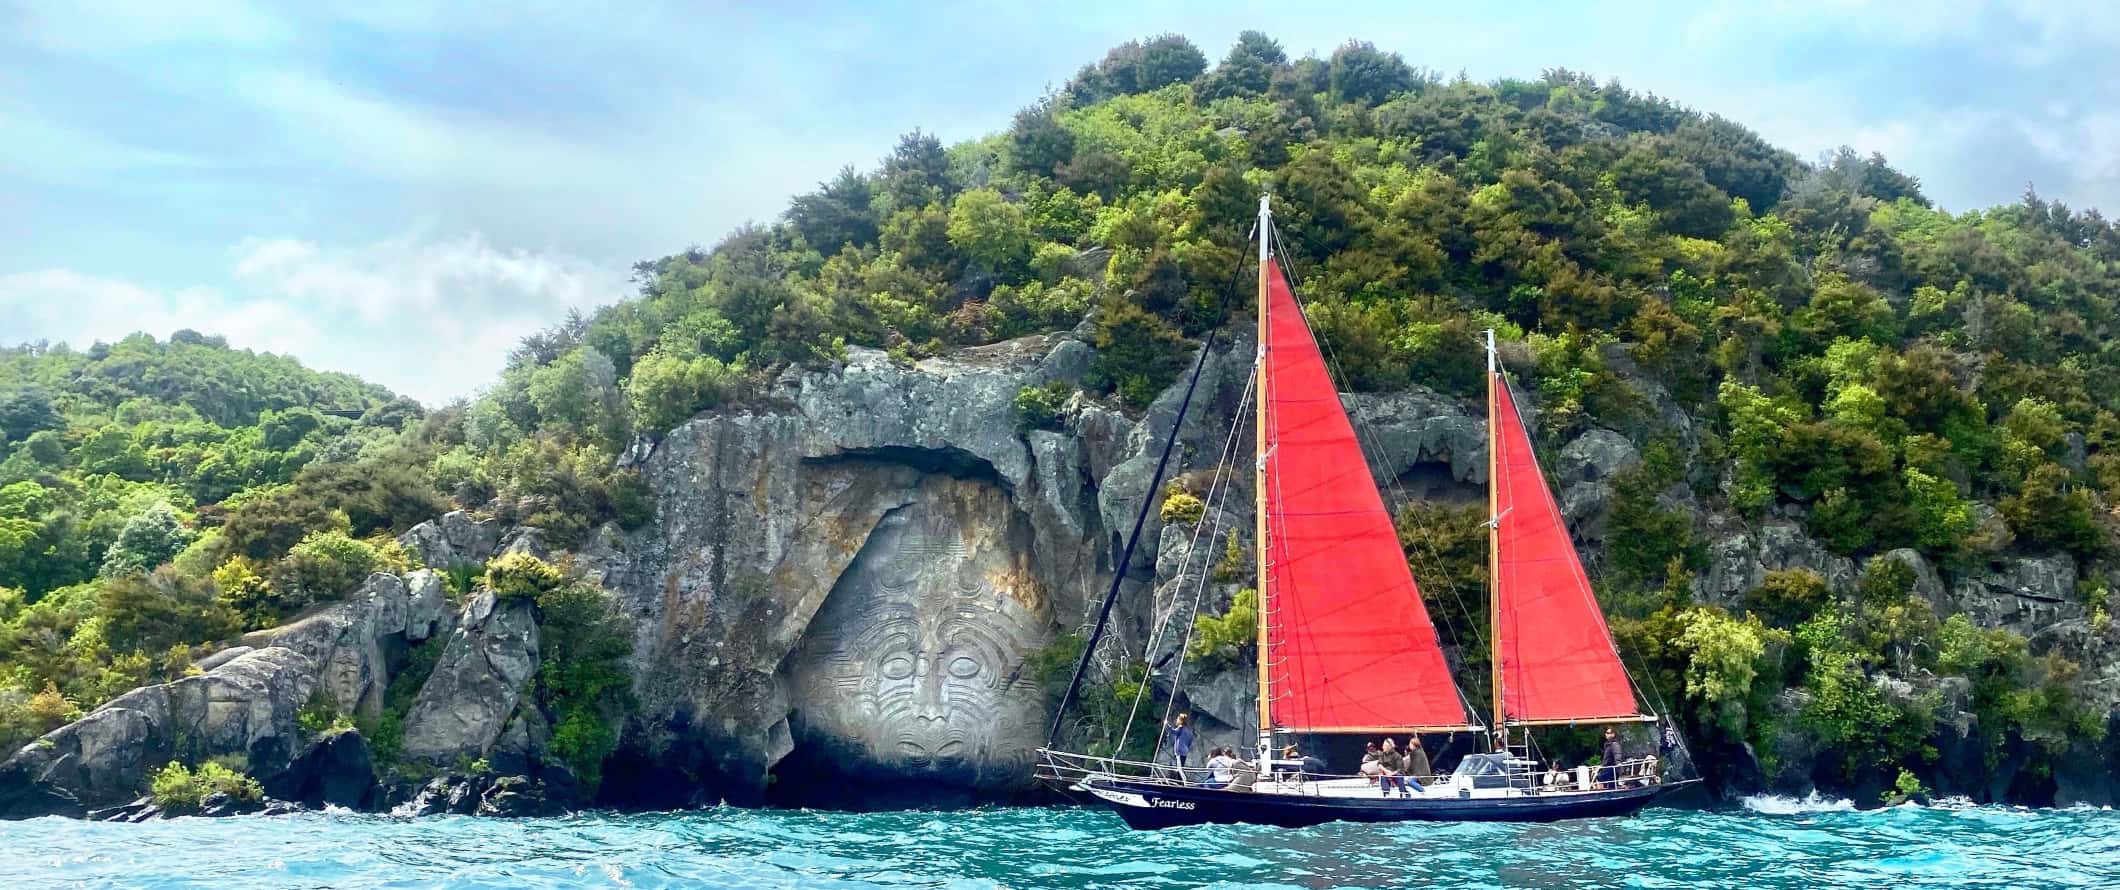 Sailboat passing by Maori rock carving on Lake Taupo in New Zealand.